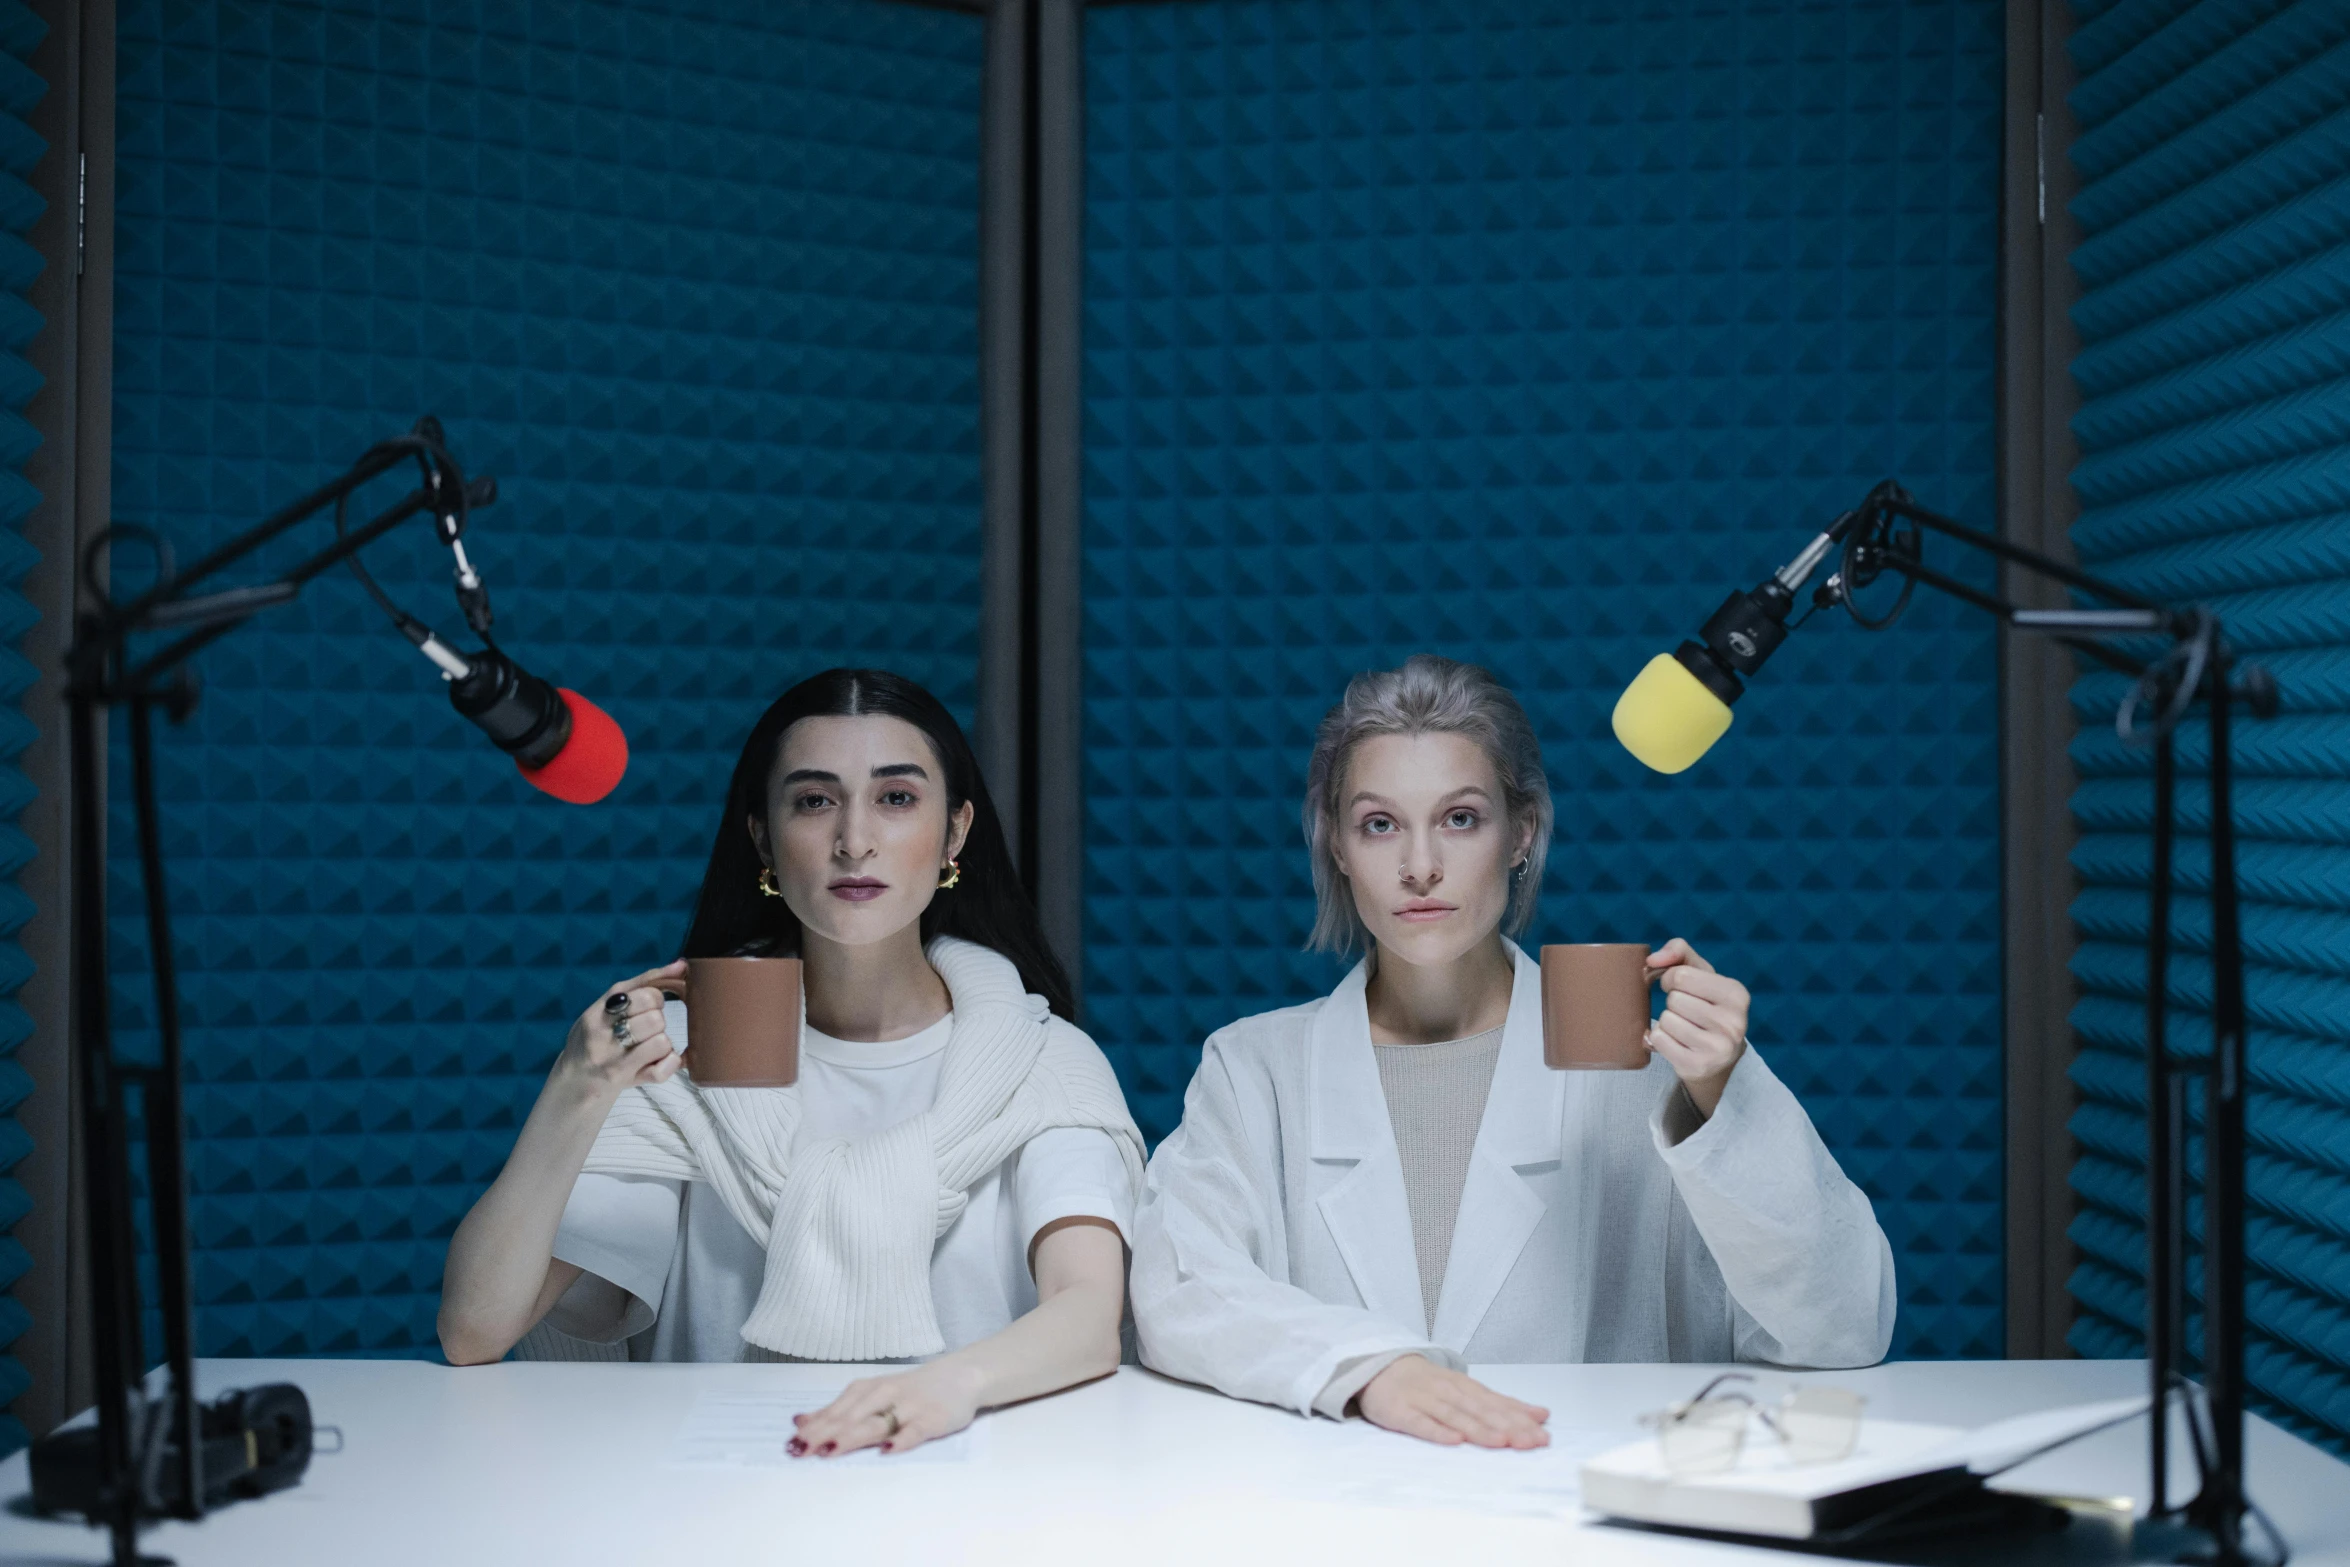 two women sitting at a table in front of microphones, an album cover, by Emma Andijewska, shutterstock, lie detector test, alessio albi, h3h3, two cups of coffee